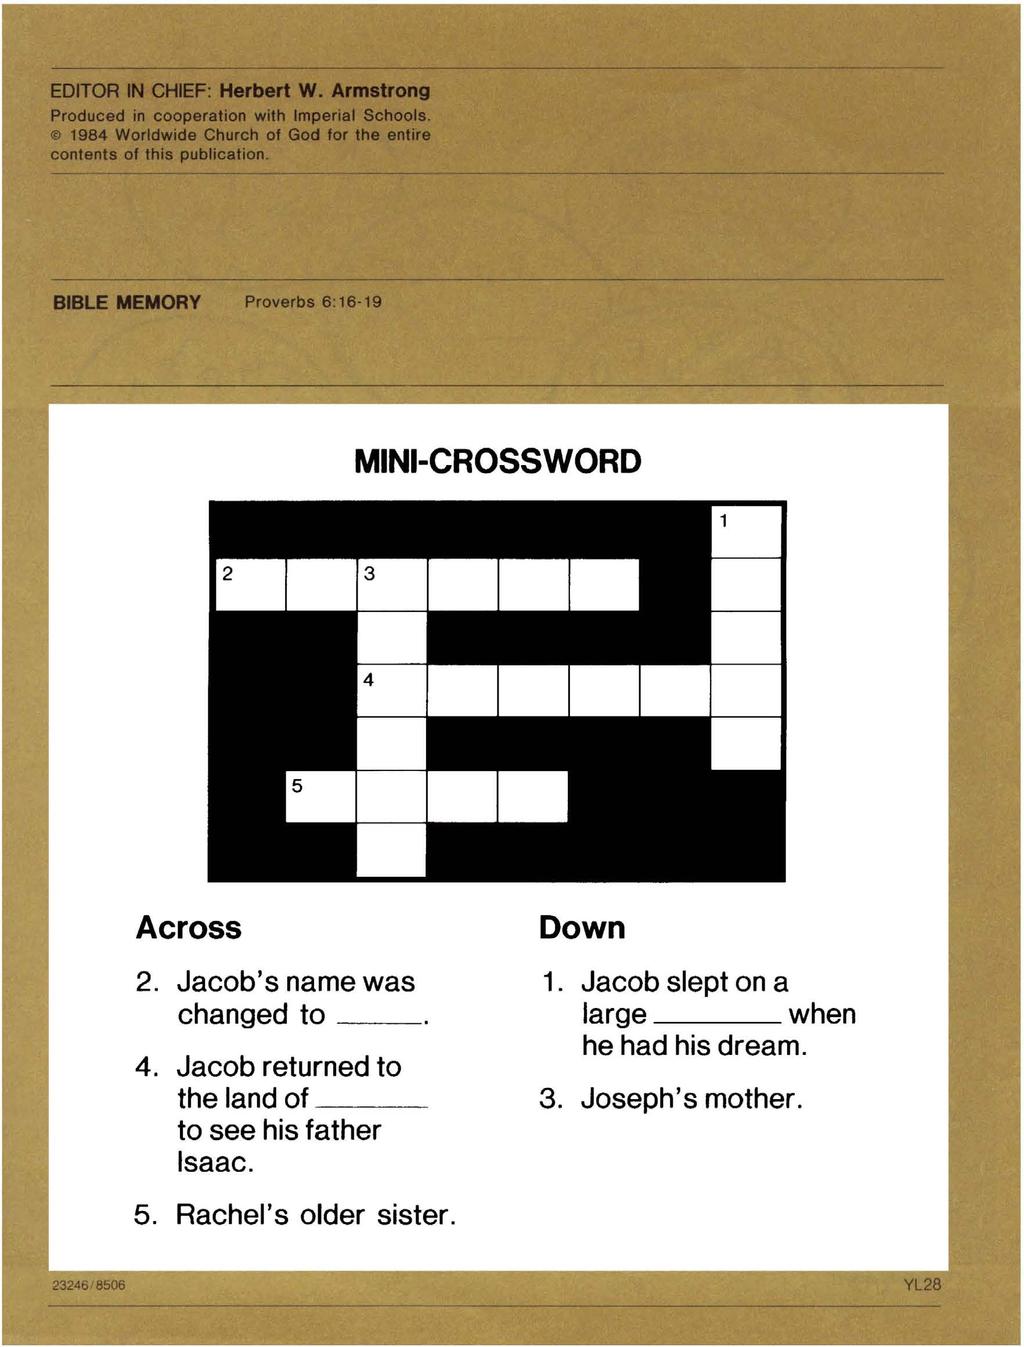 BIBLE MEMORY Proverbs 8: 18 19 MINI-CROSSWORD Across 2. Jacob's name was changed to 4.